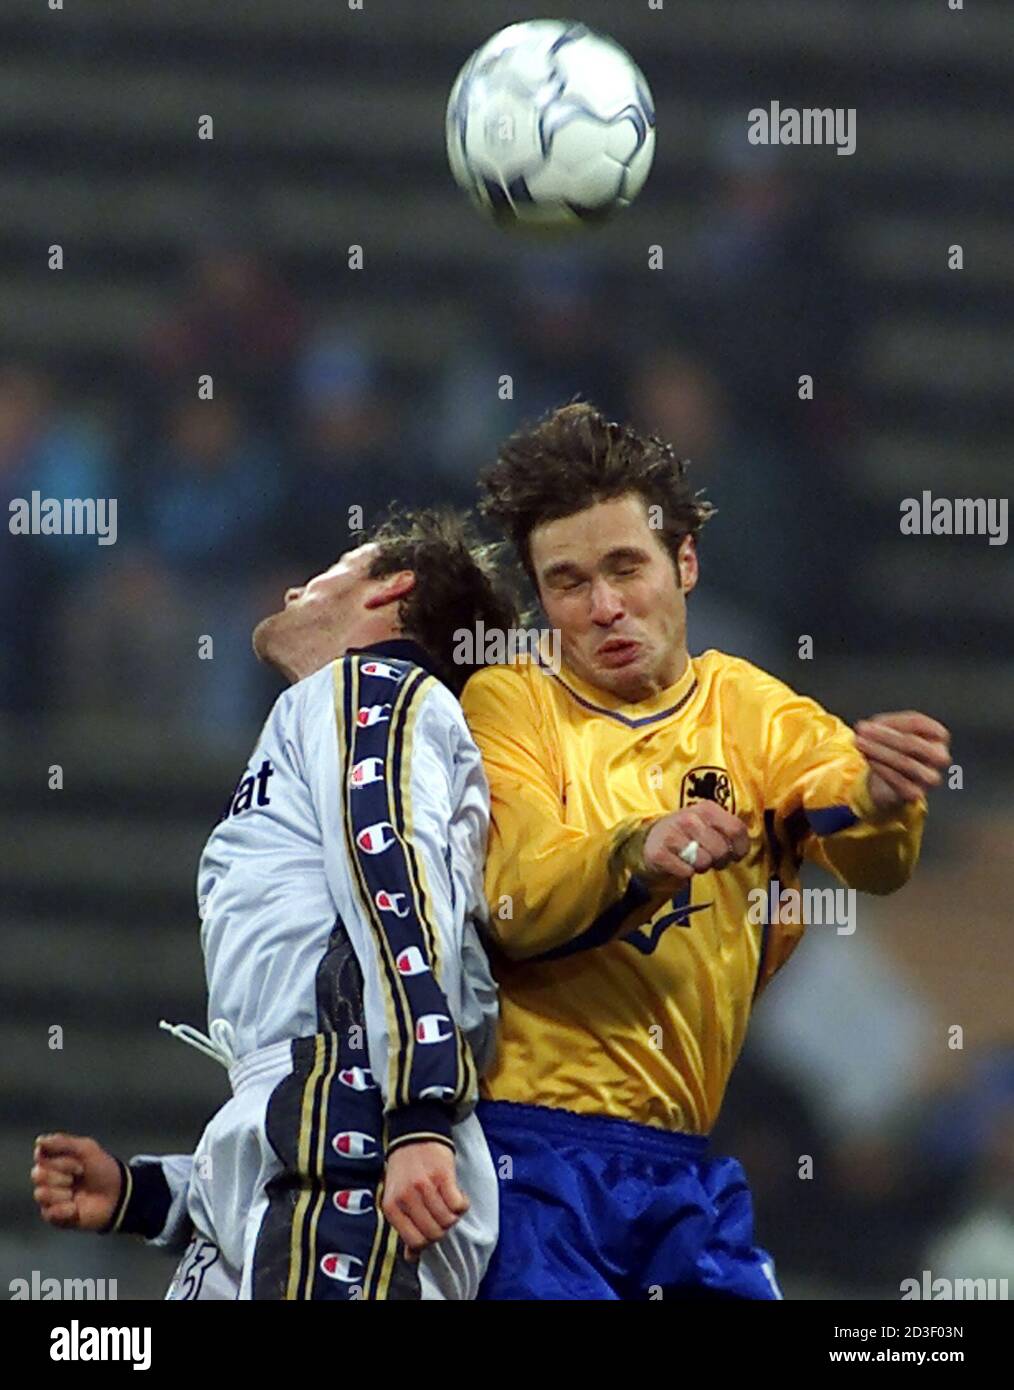 Harald Cerny (R) of TSV 1860 Munich challenges Gianluca Falsini of AC Parma during their third round second leg UEFA Cup soccer match in Munich's olympic stadium, December 5, 2000. Parma won the match 2-0.  MAD Stock Photo